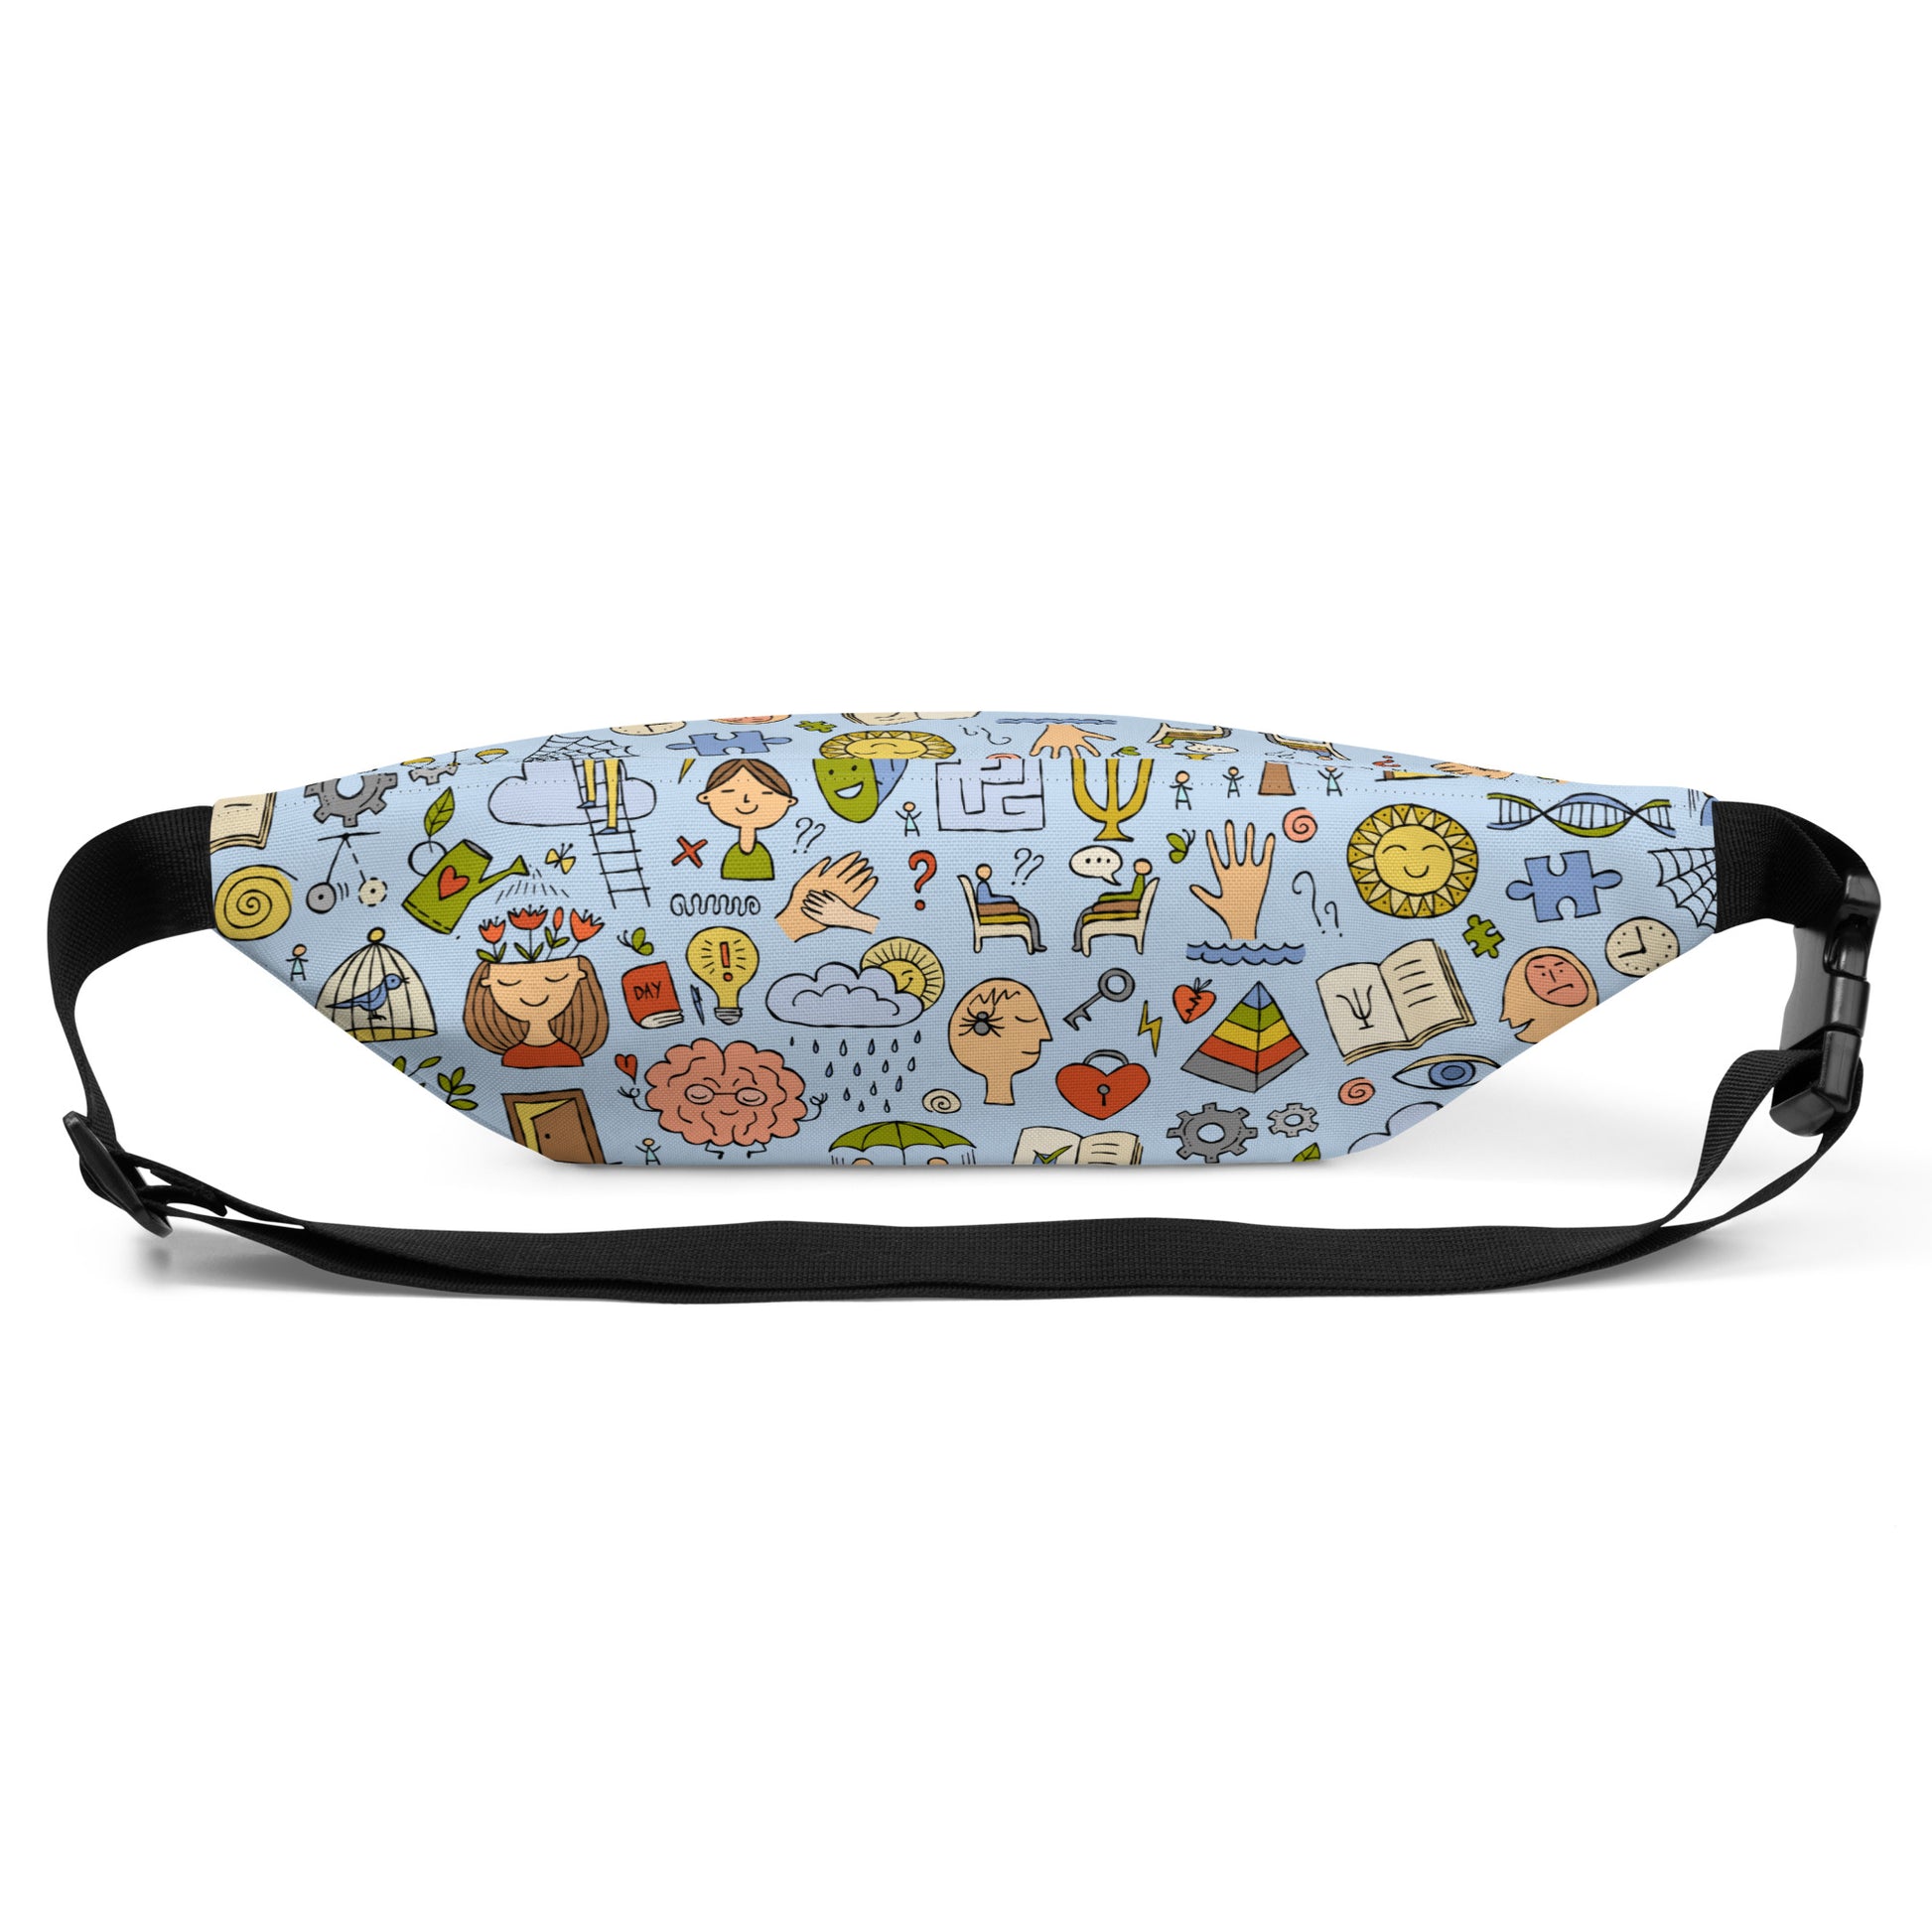 Waist Bag with funny psychology print. Back view